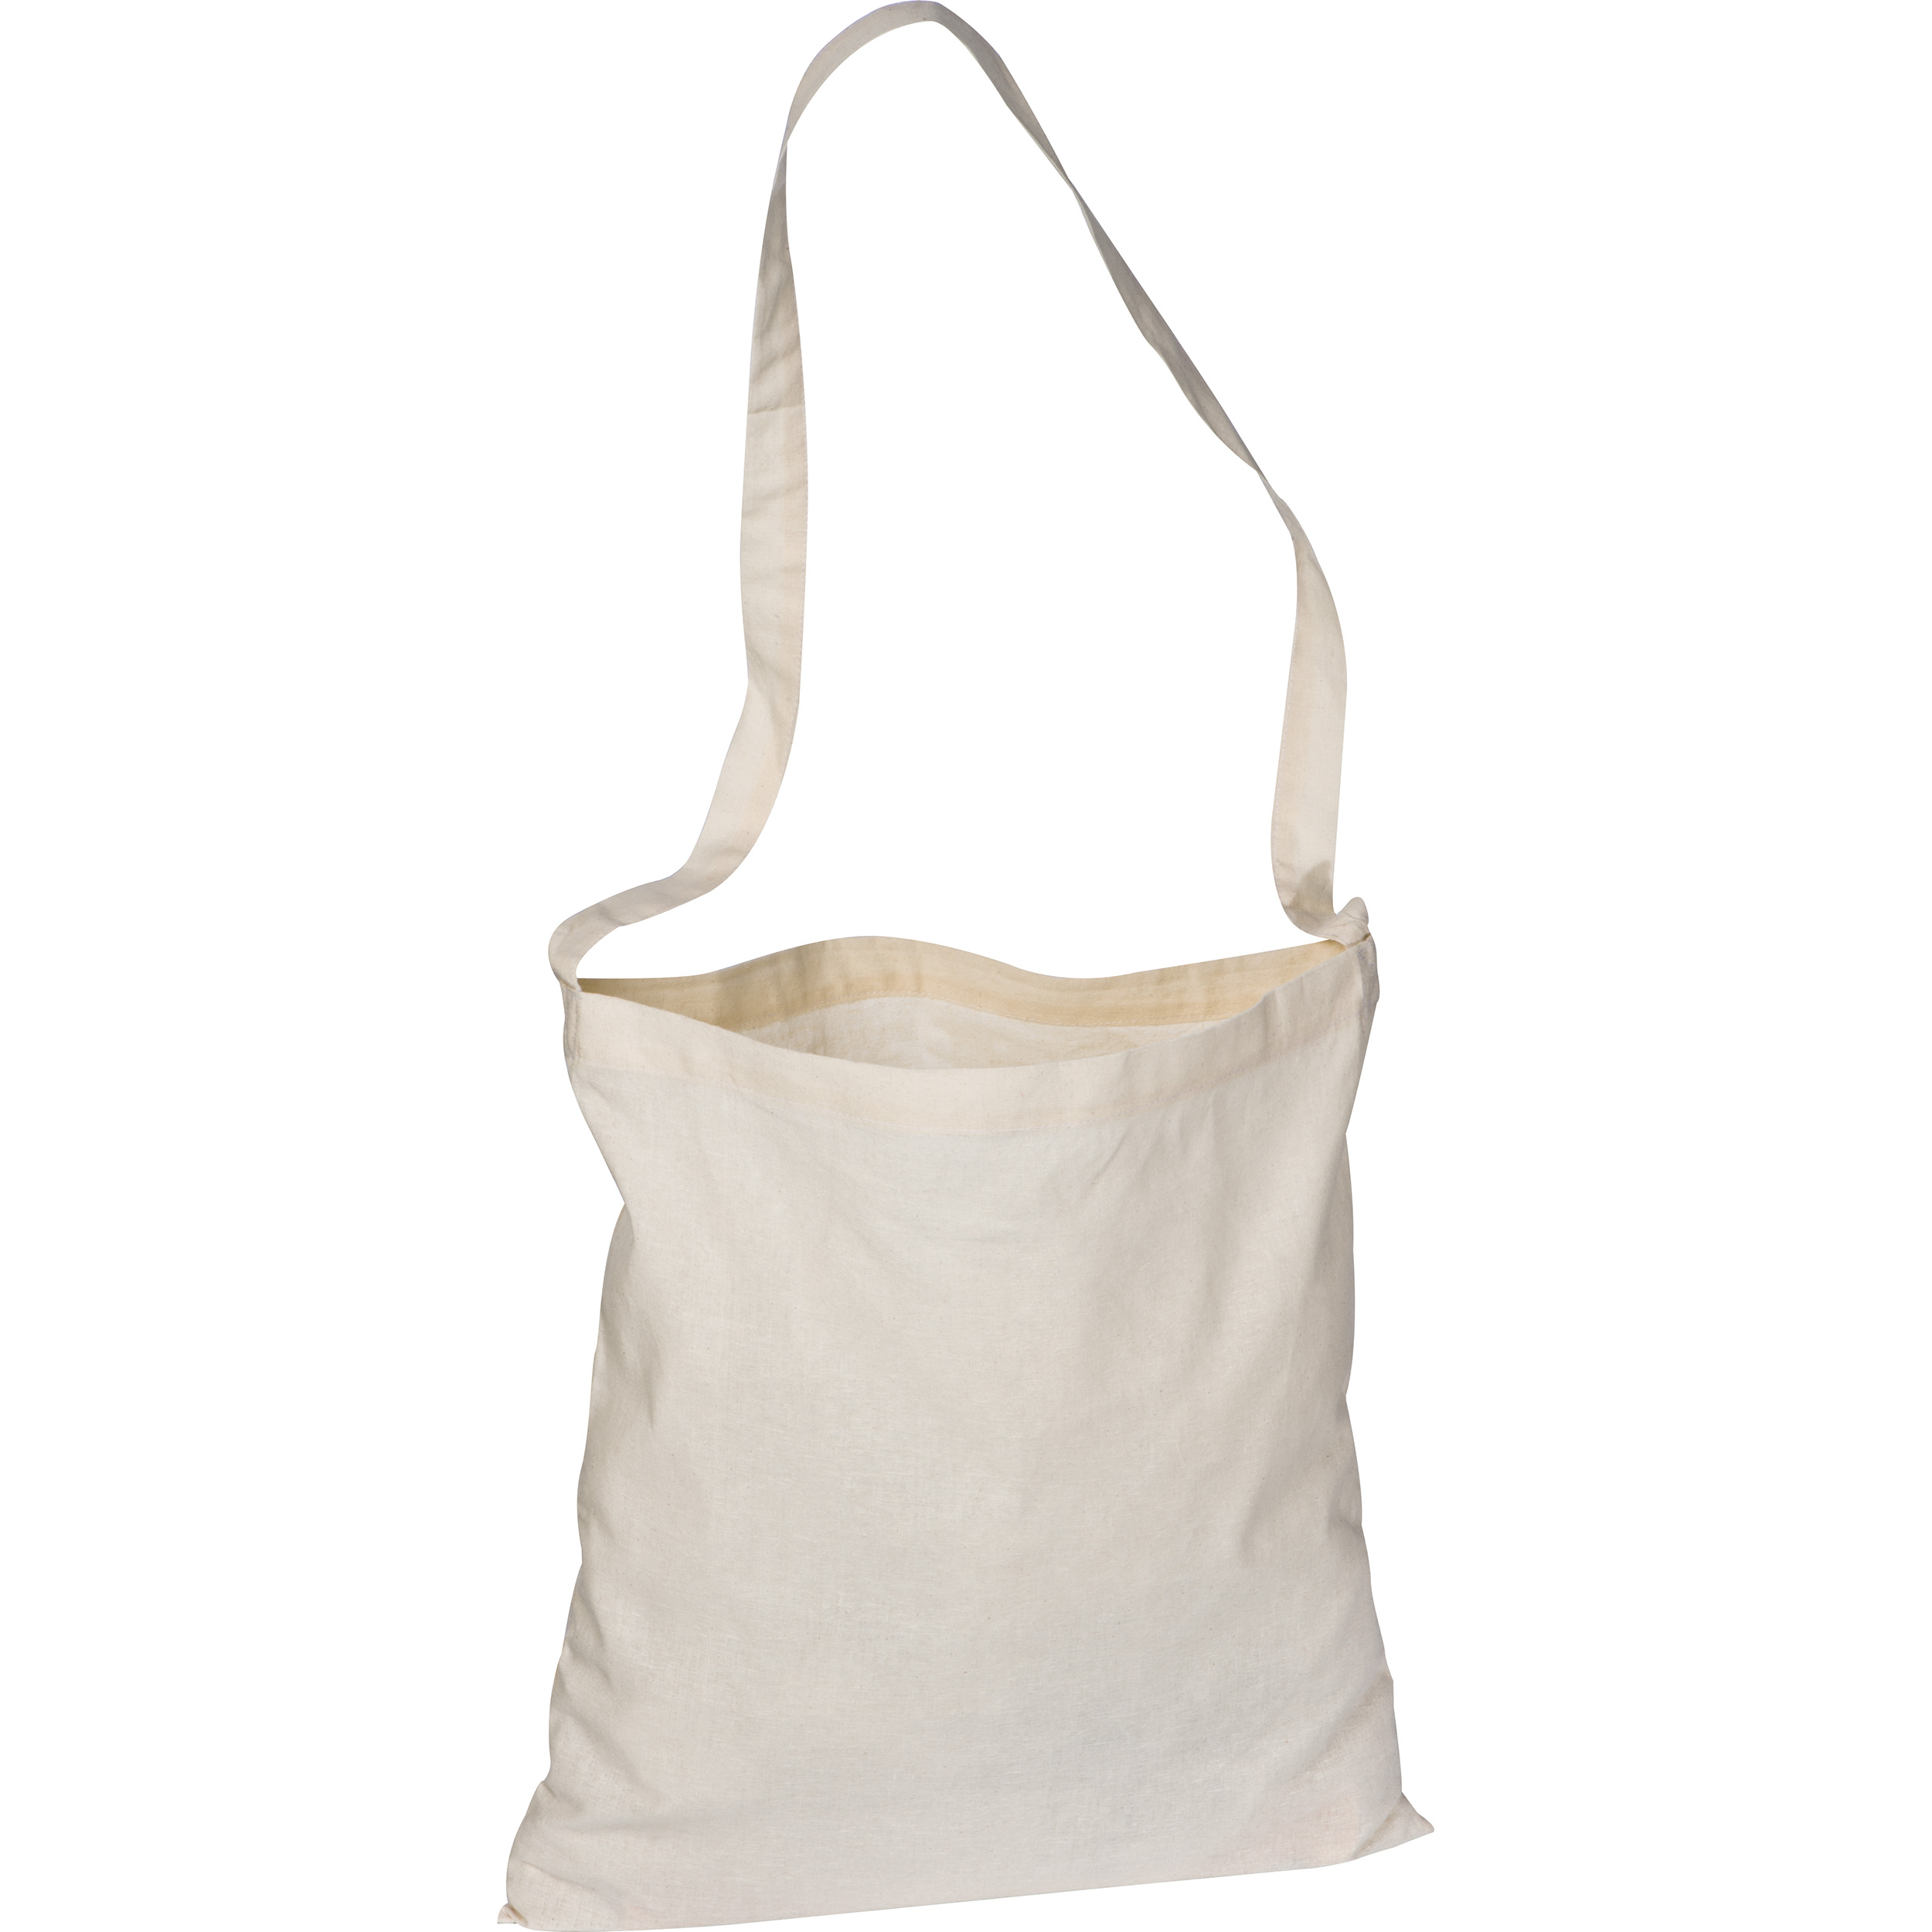 Cotton bag with long handle